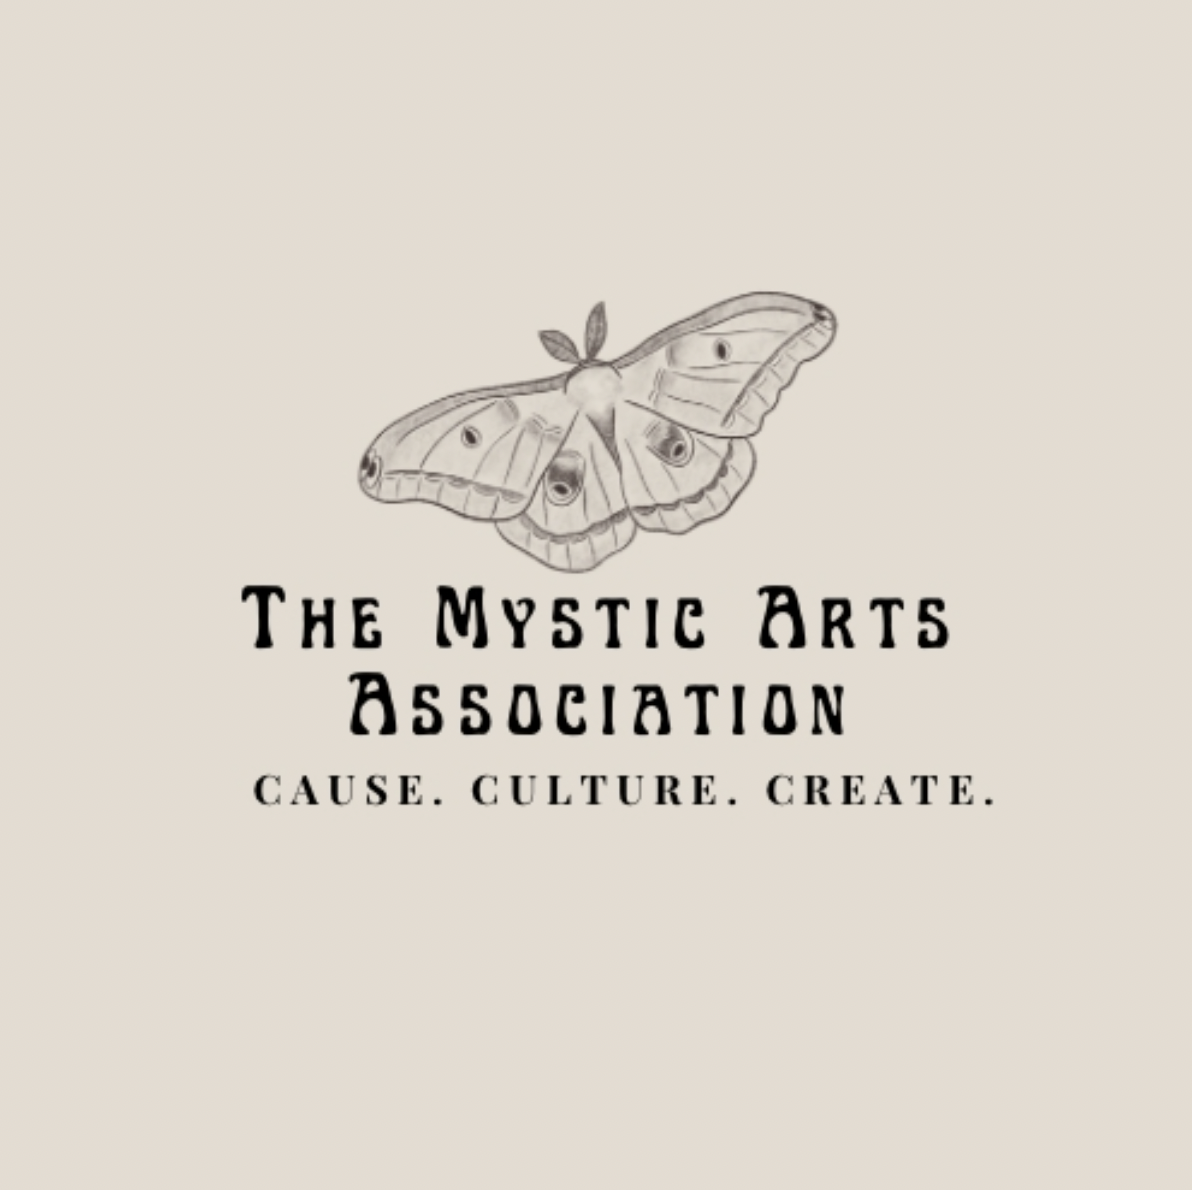 Mystic+Arts+Association+seeking+applications+for+Tales+of+Old+Art+Exhibition